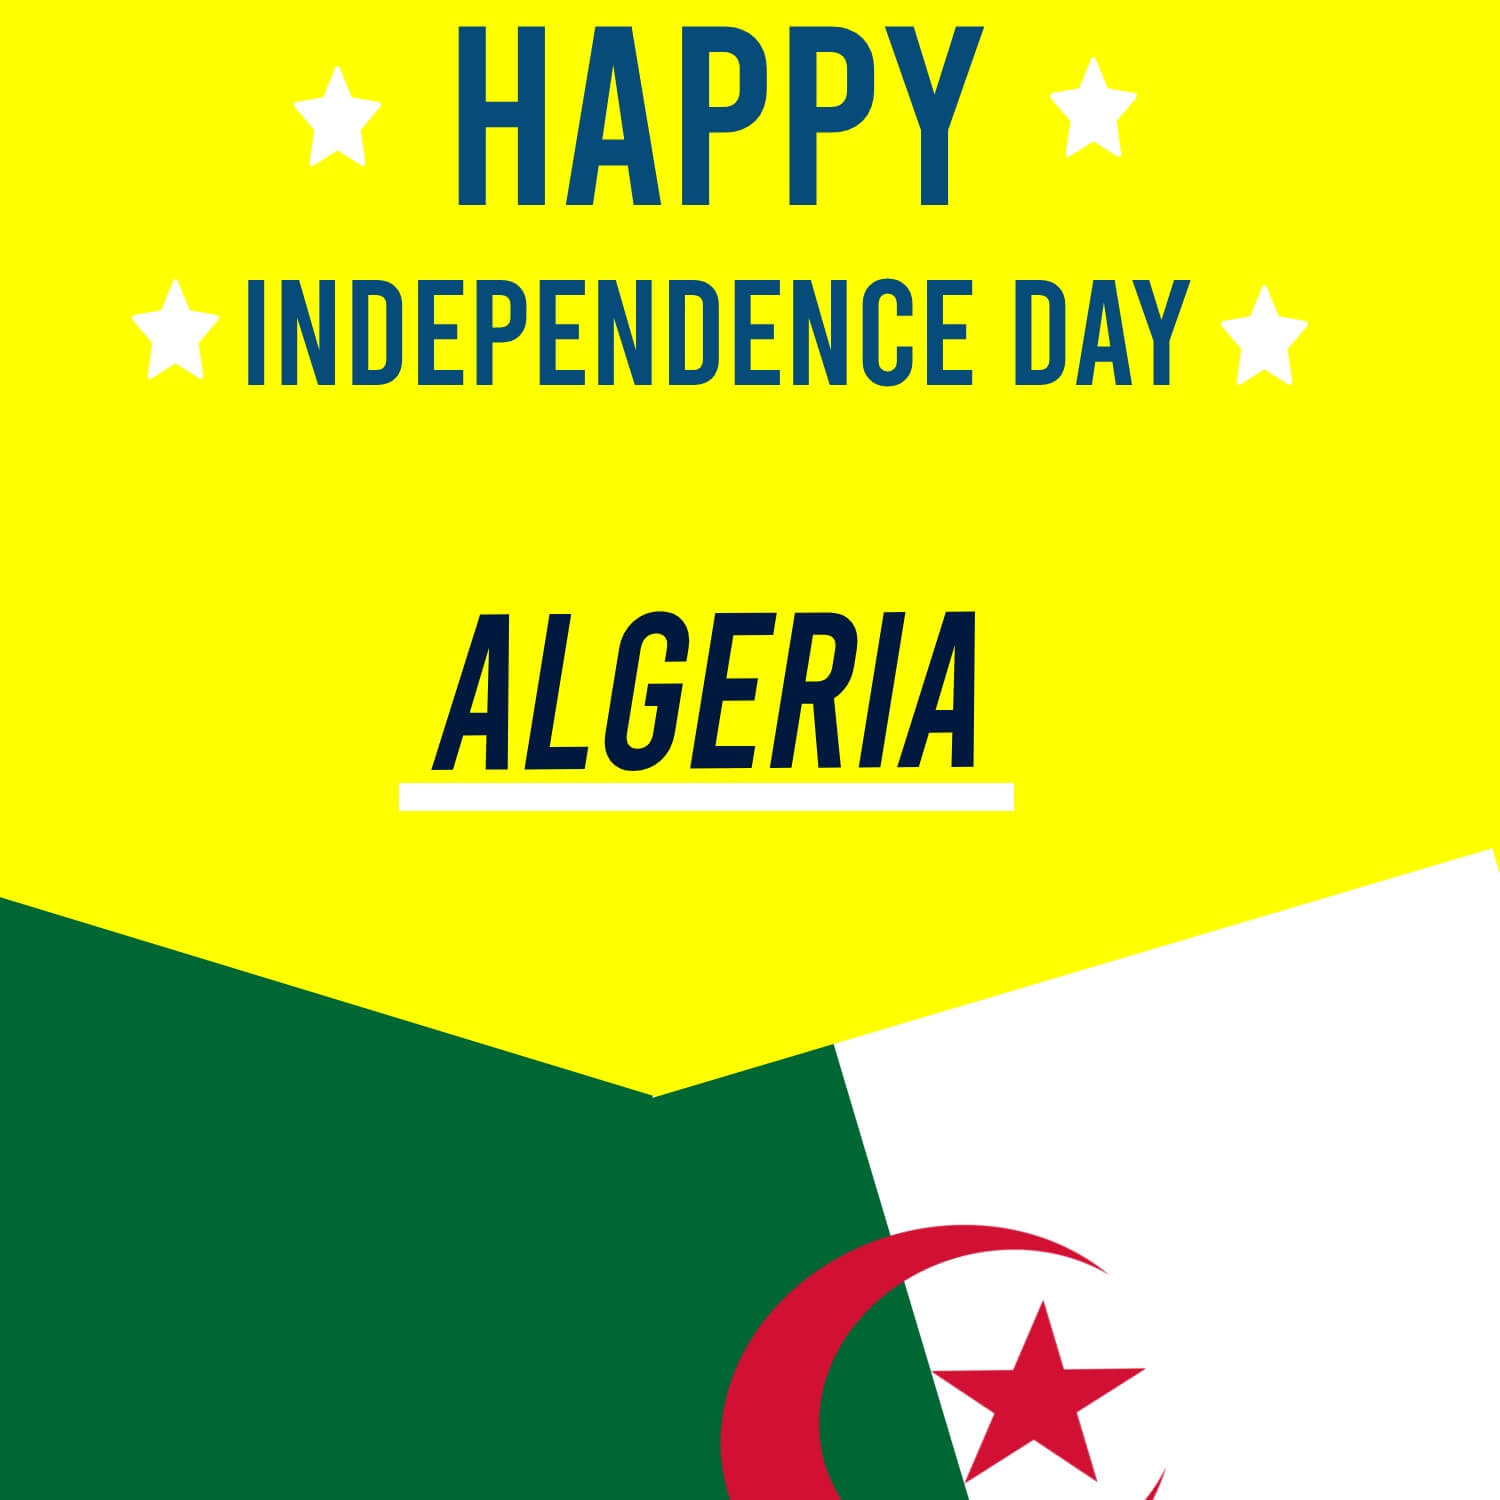 Happy Independence Day, Algeria! - Algeria Independence Day Messages wishes, messages, and status